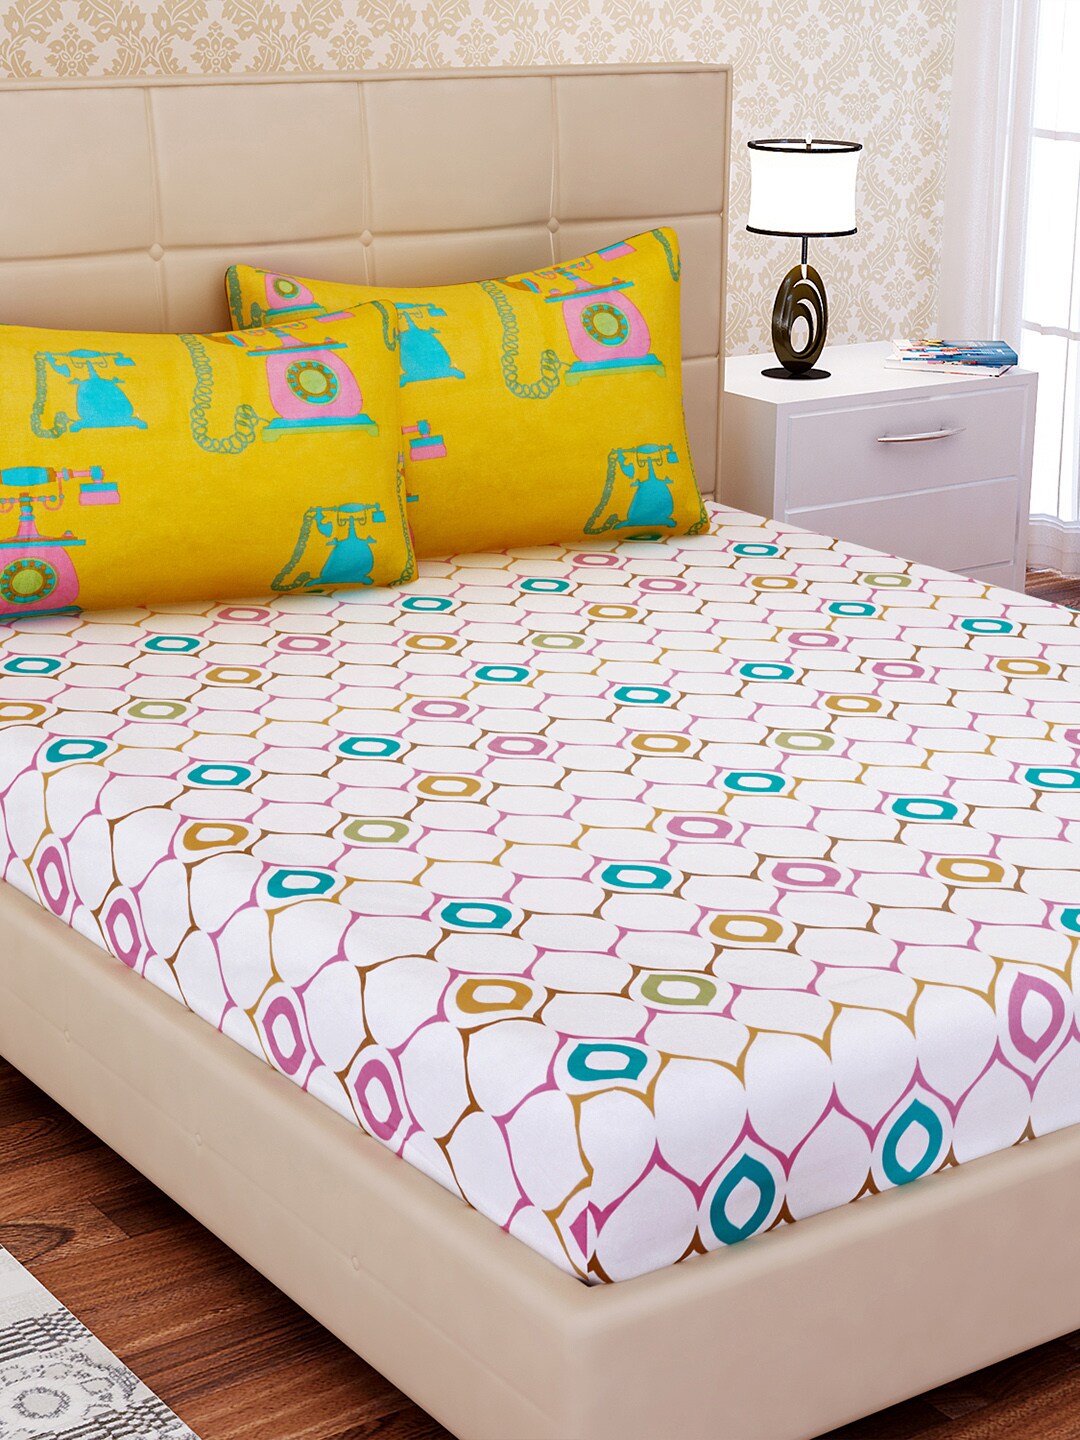 SEJ by Nisha Gupta White & Pink Geometric 144 TC Cotton 1 King Bedsheet with 2 Pillow Covers